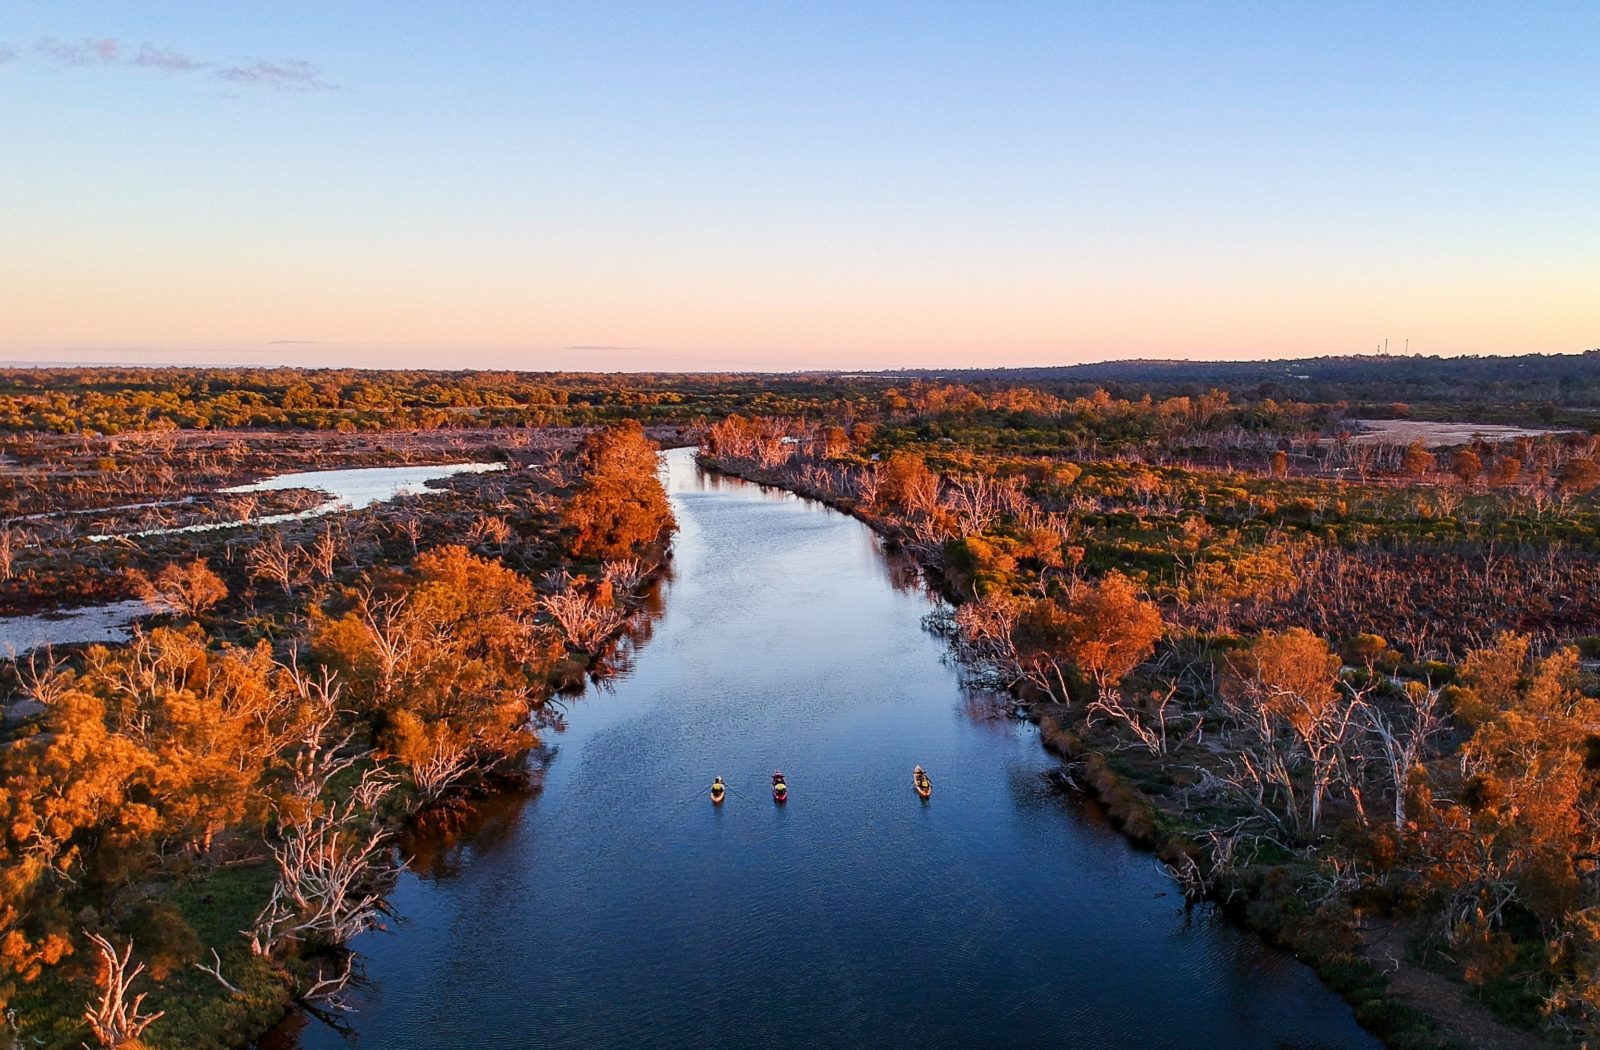 Drone shot of three kayaks on a river.